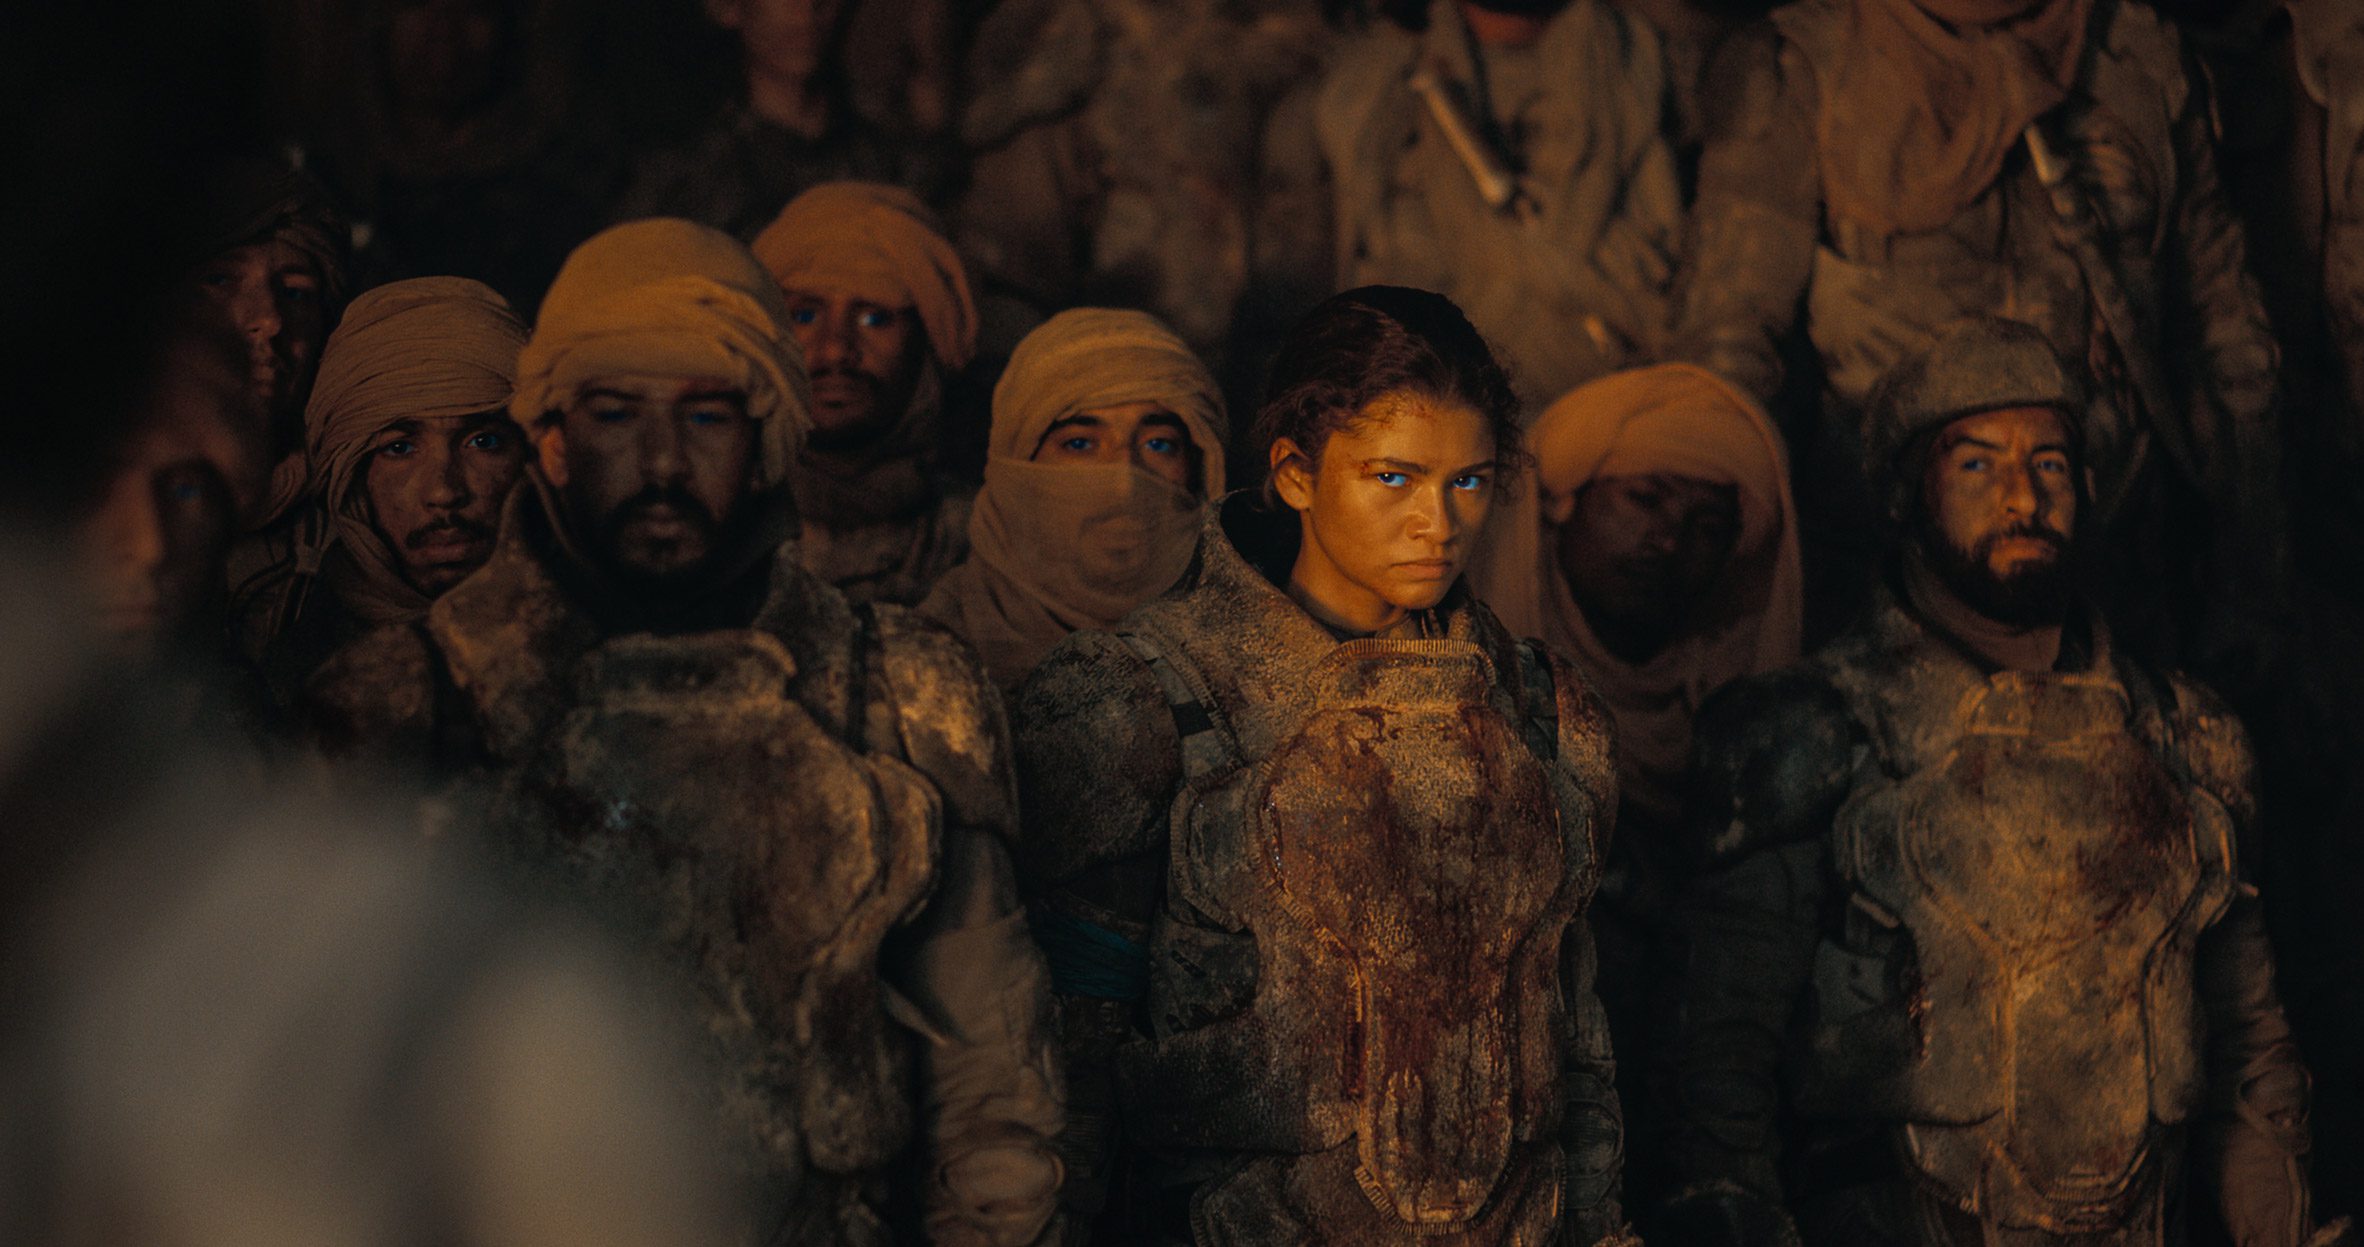 Dune Part Two production photo showing Zendaya as Chani glaring out from within a crowd of Fremen fighters, wearing a mix of headscarves and helmets